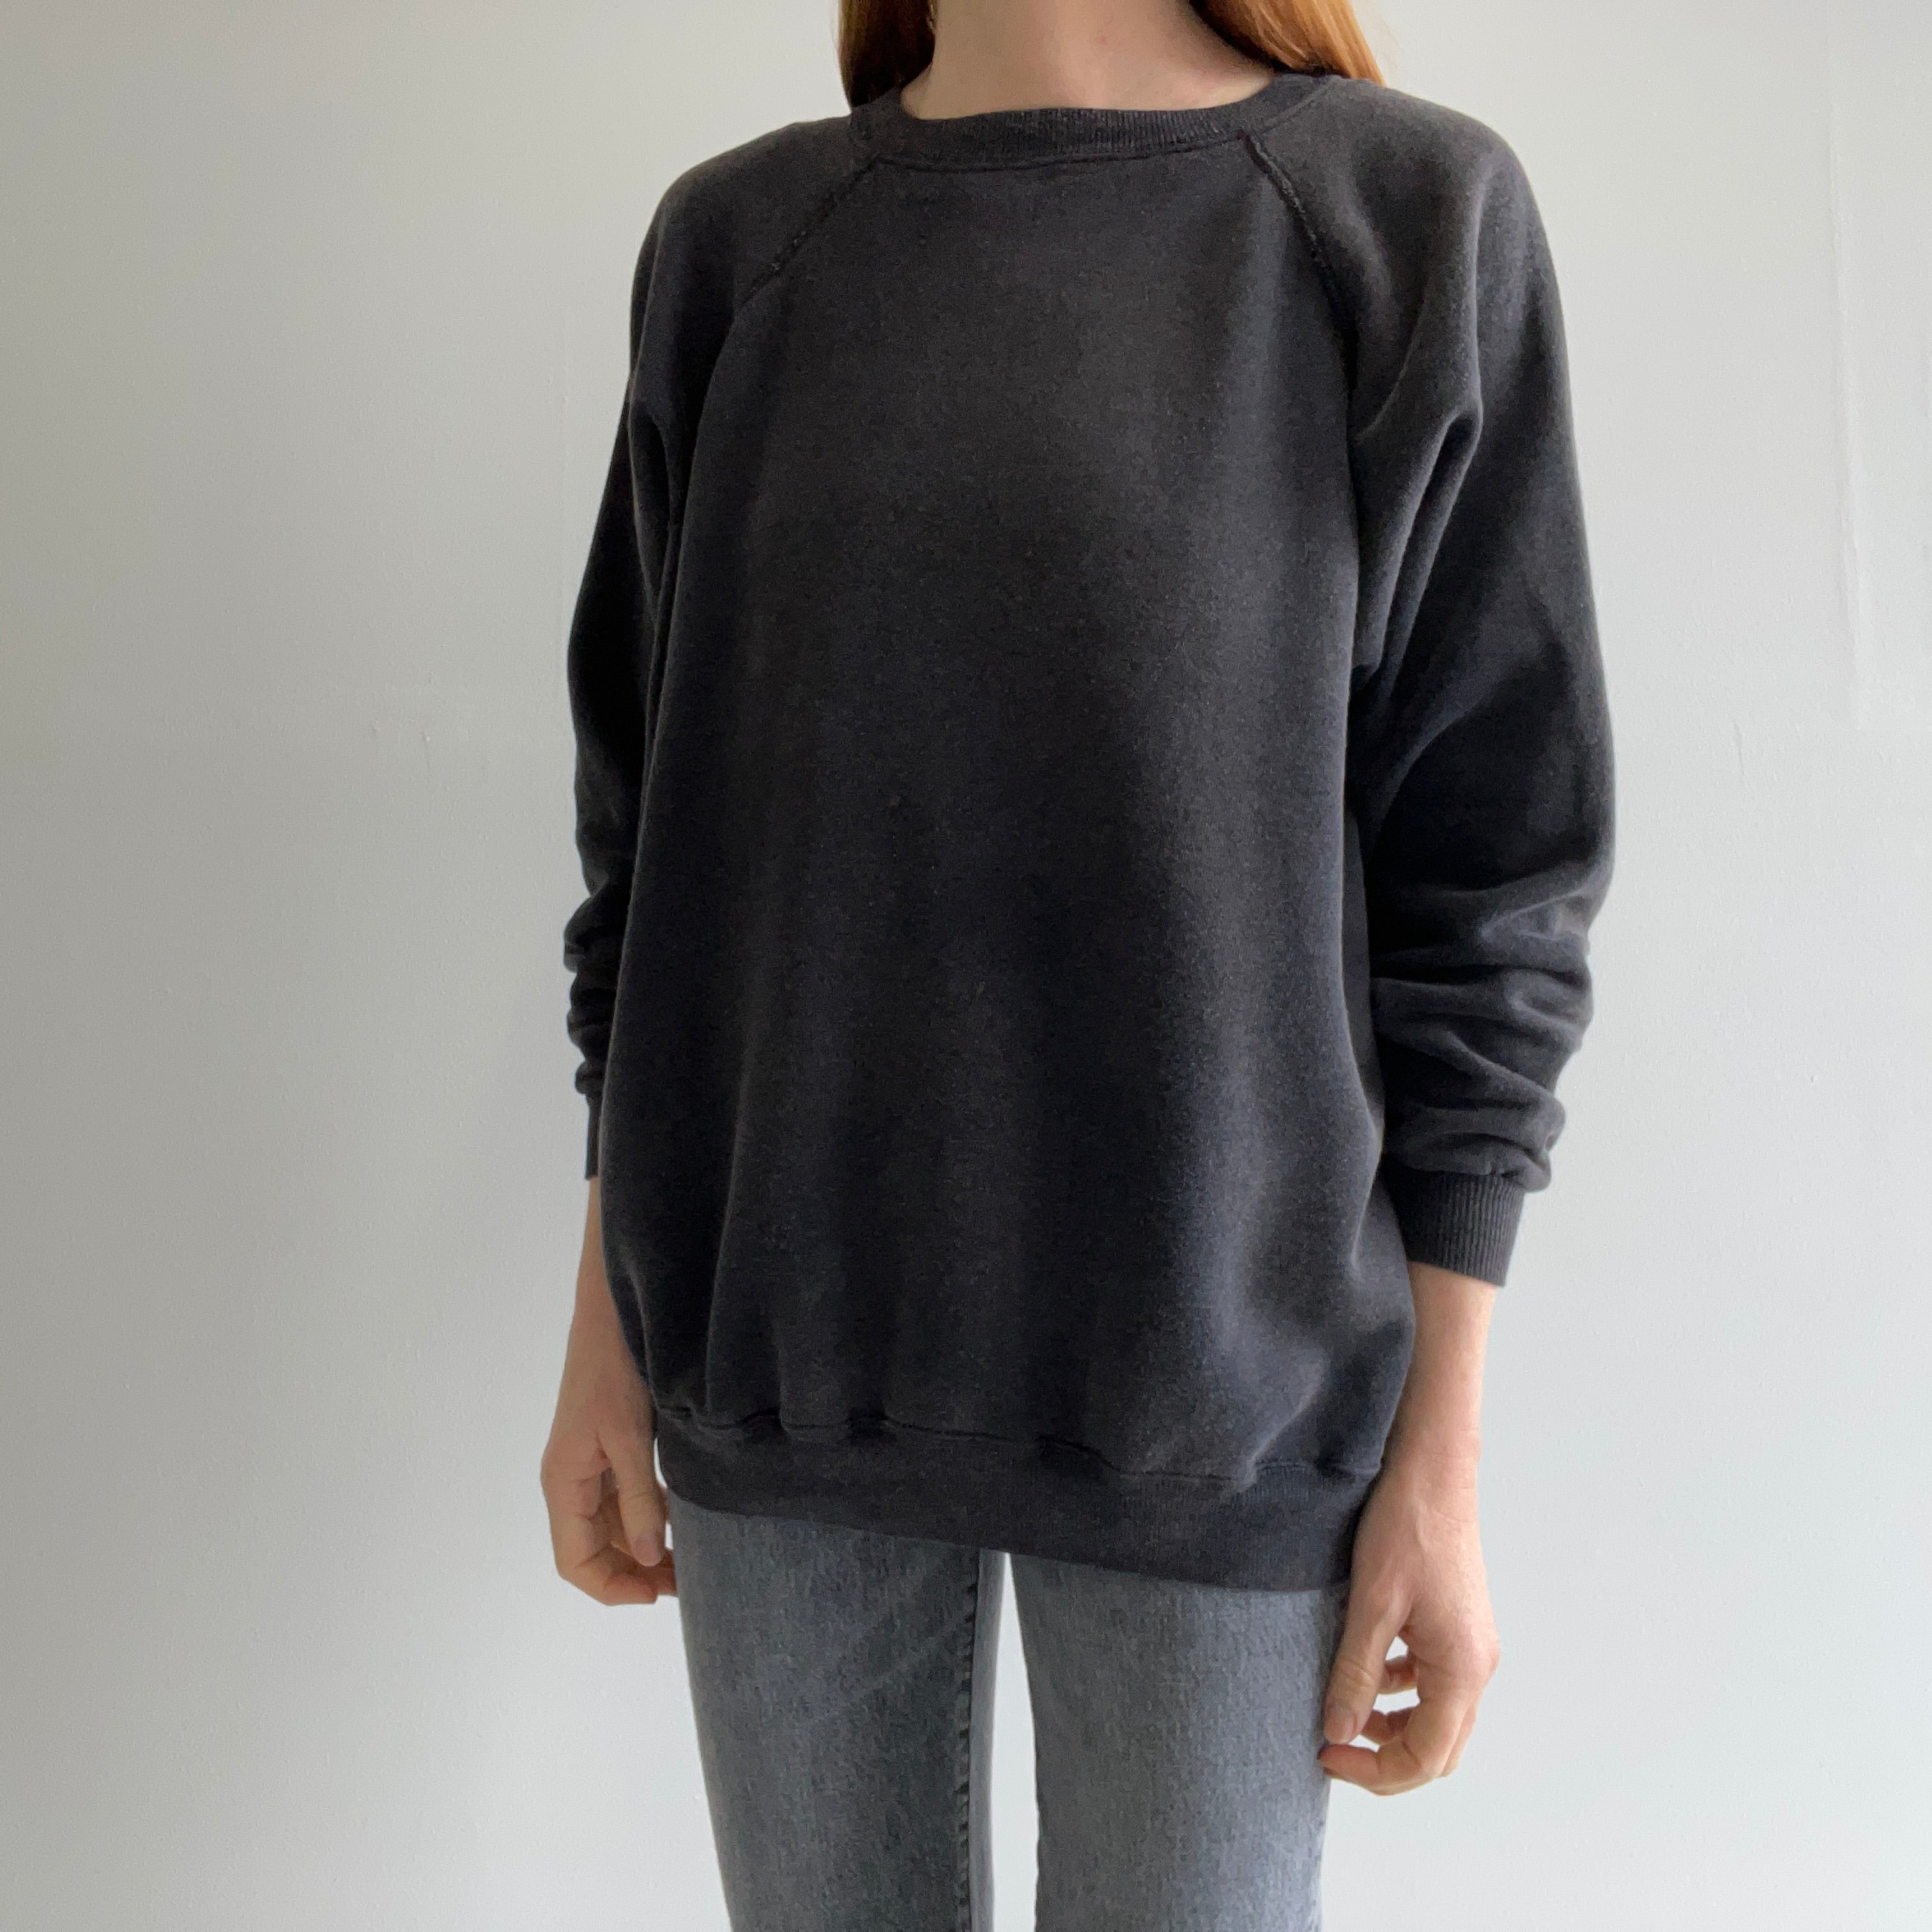 1980s Soft, Slouchy, Luxurious, Stained (but cool) Faded Black/Gray Sweatshirt